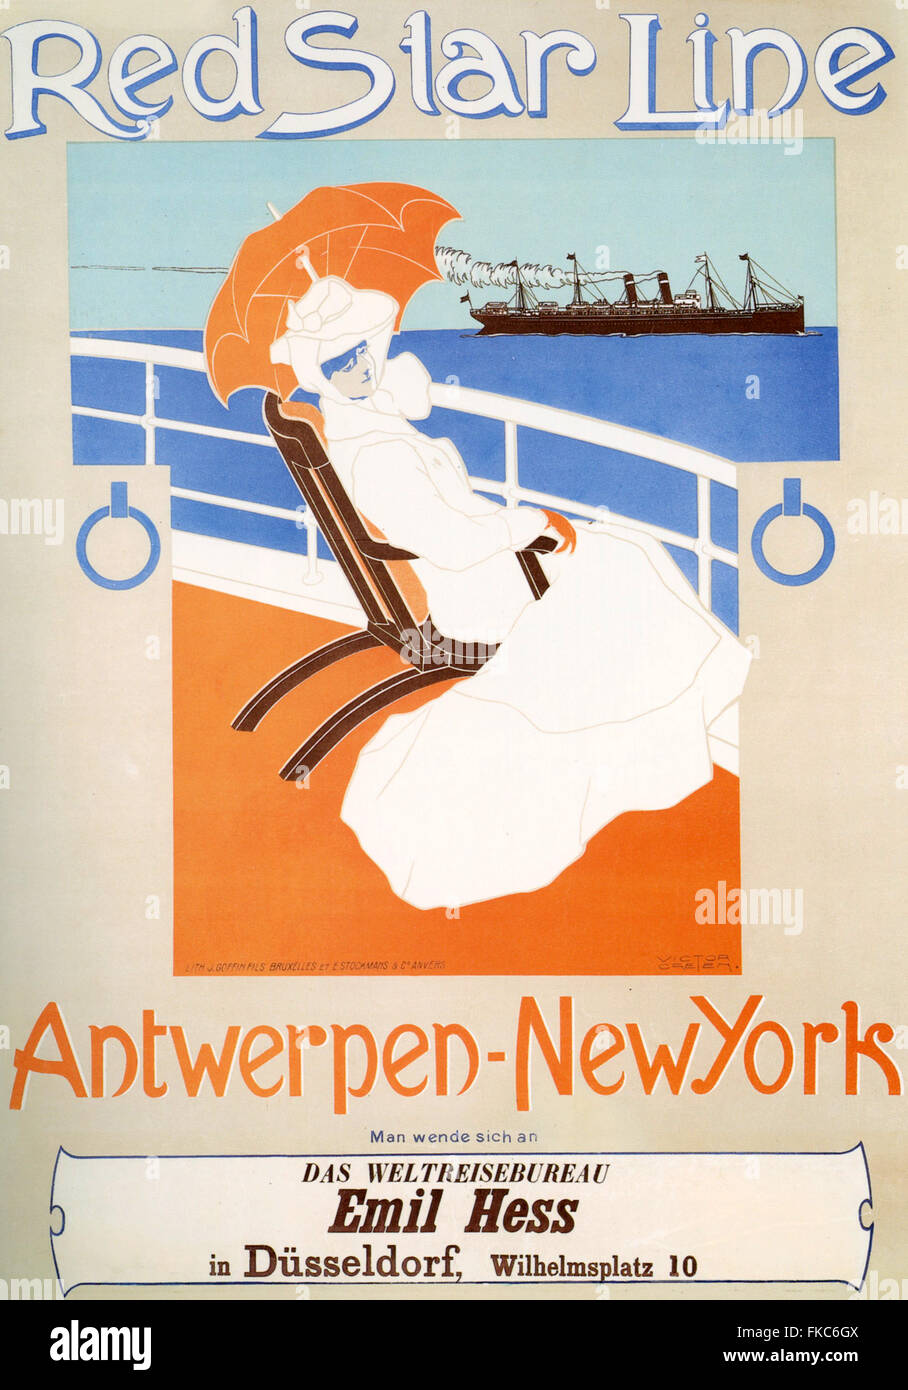 1900S UK Red Star Line Poster Foto Stock